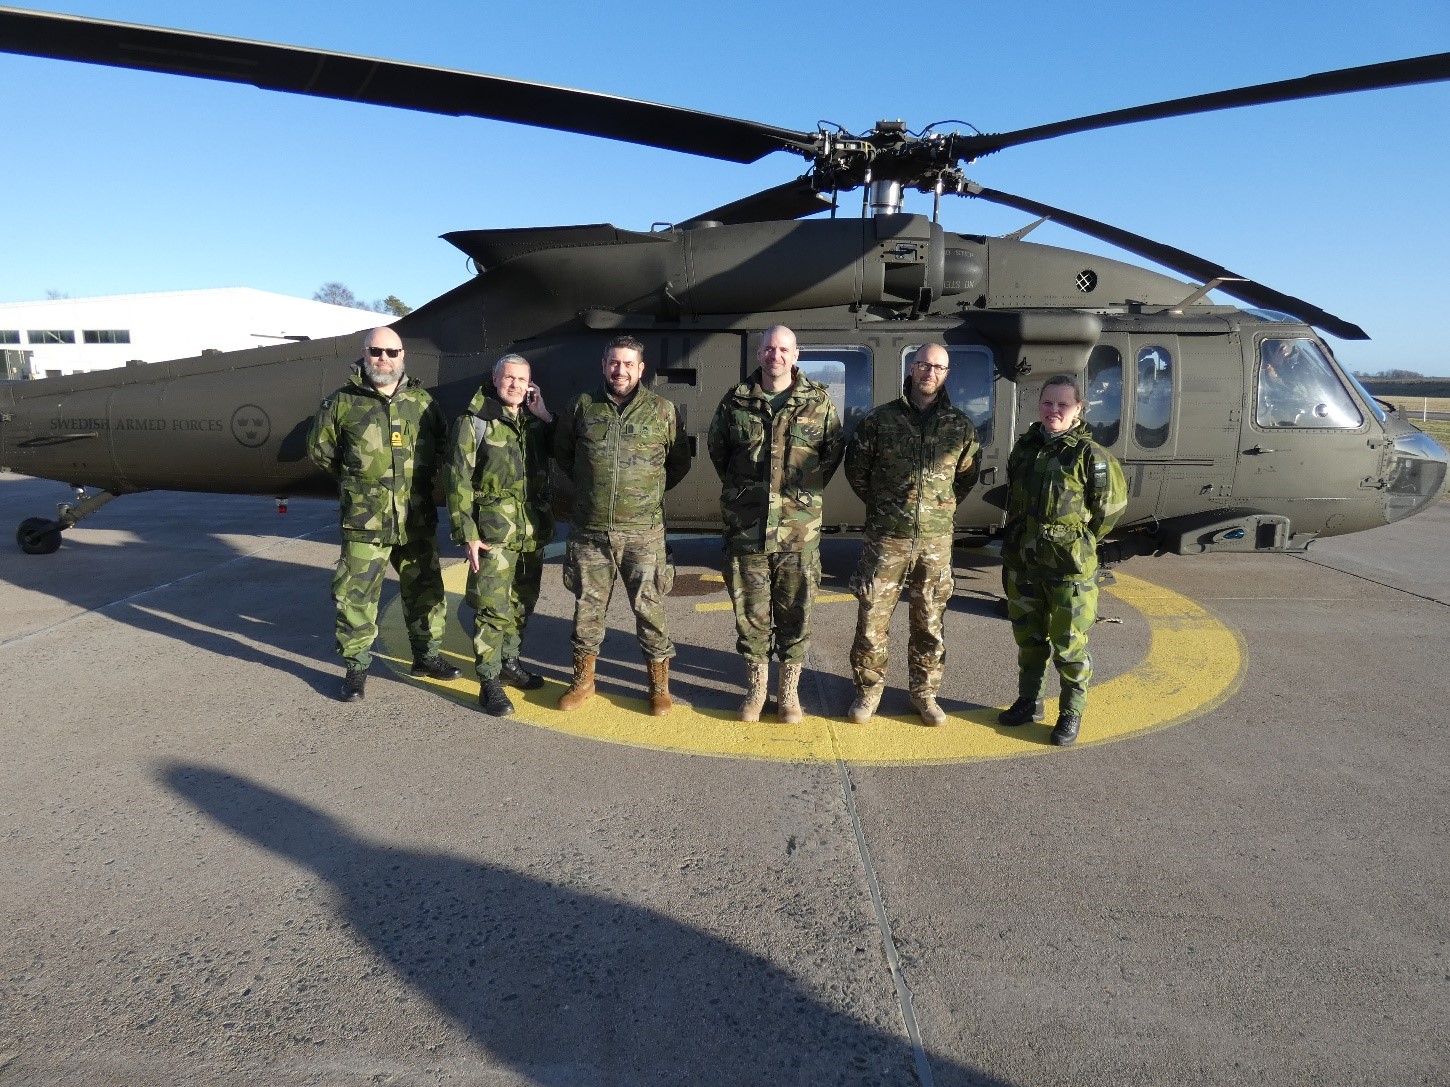 Inspection team in front of a Sikorsky UH-60M